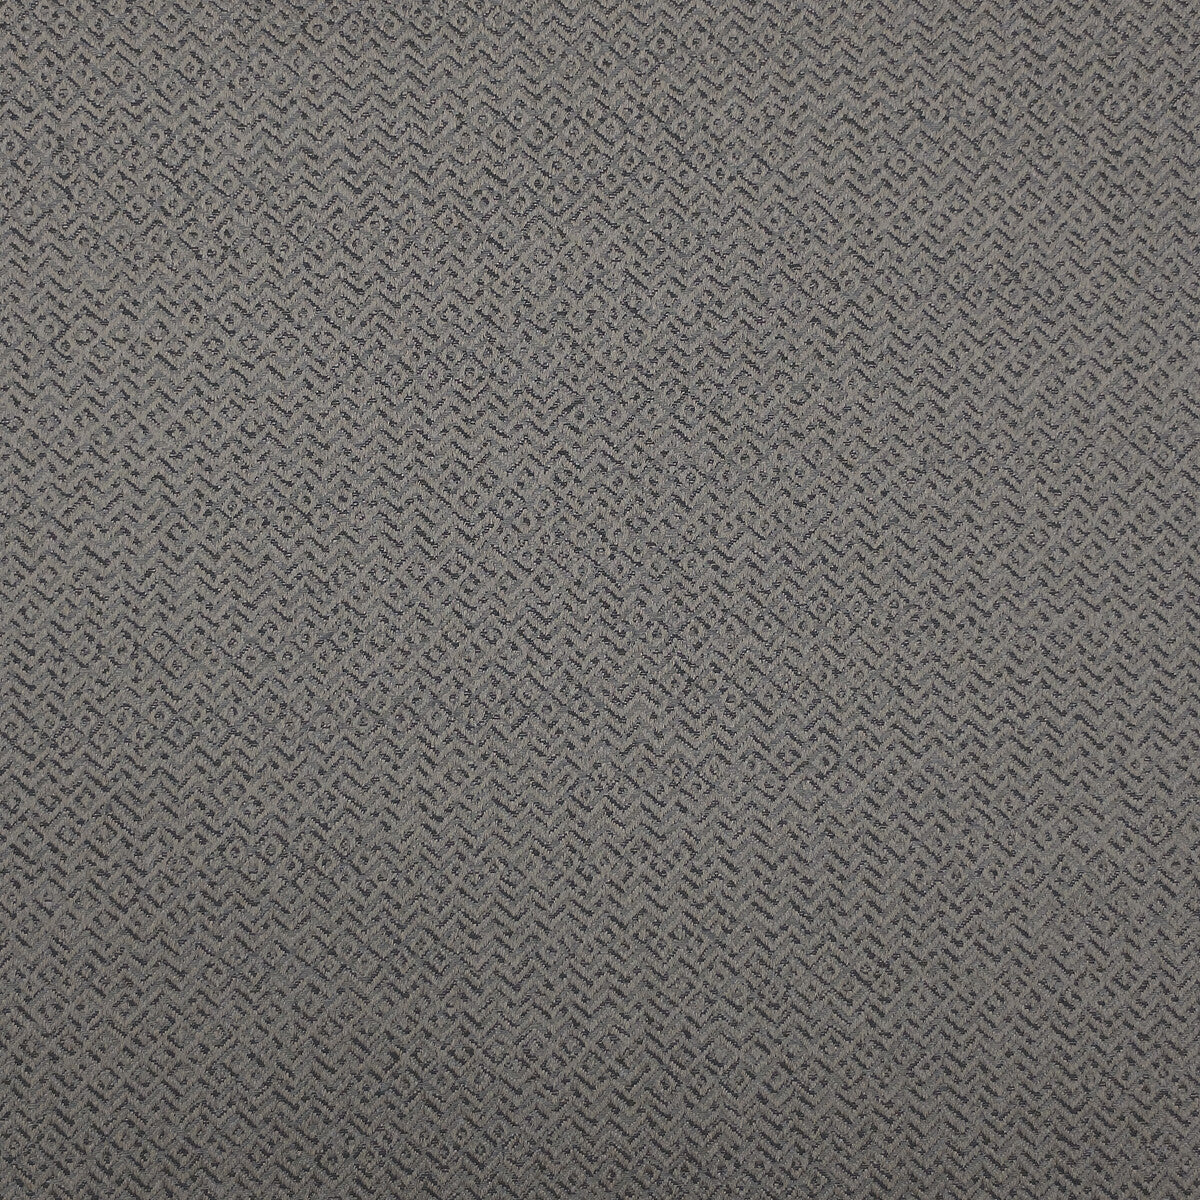 Kf Des fabric - pattern LZ-30203.09.0 - by Kravet Design in the Lizzo collection